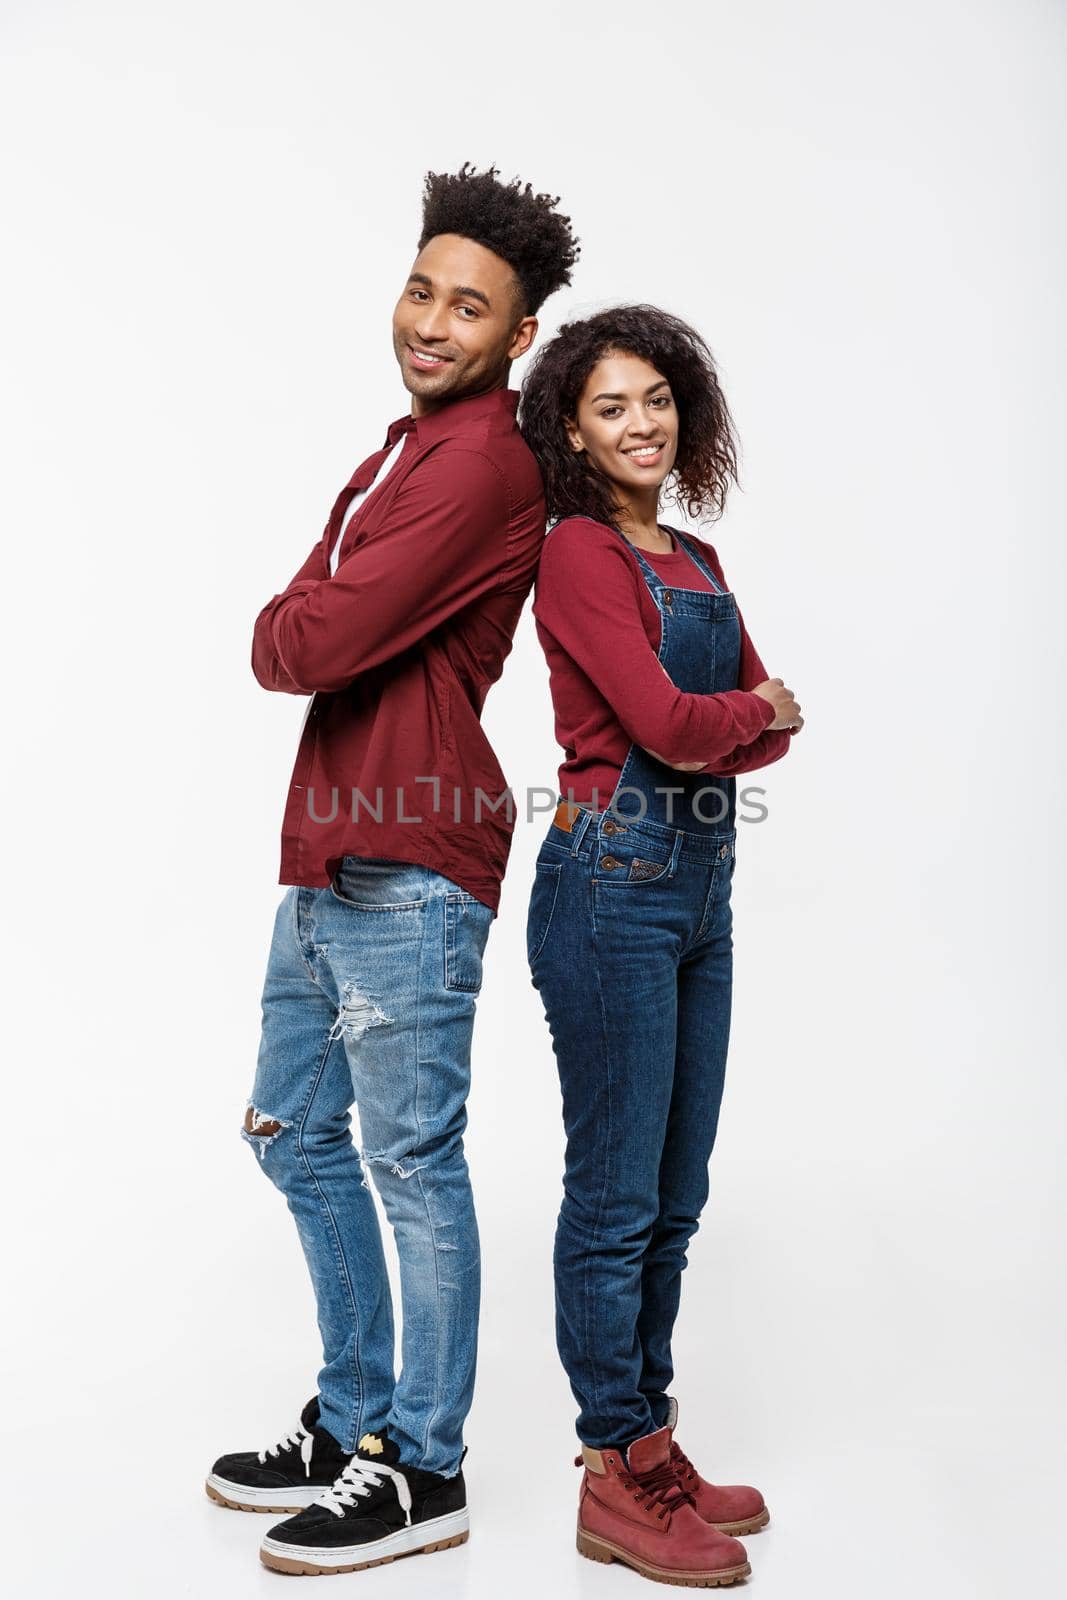 Cheerful African American man and woman with crossed hands standing back to back over isolated white background